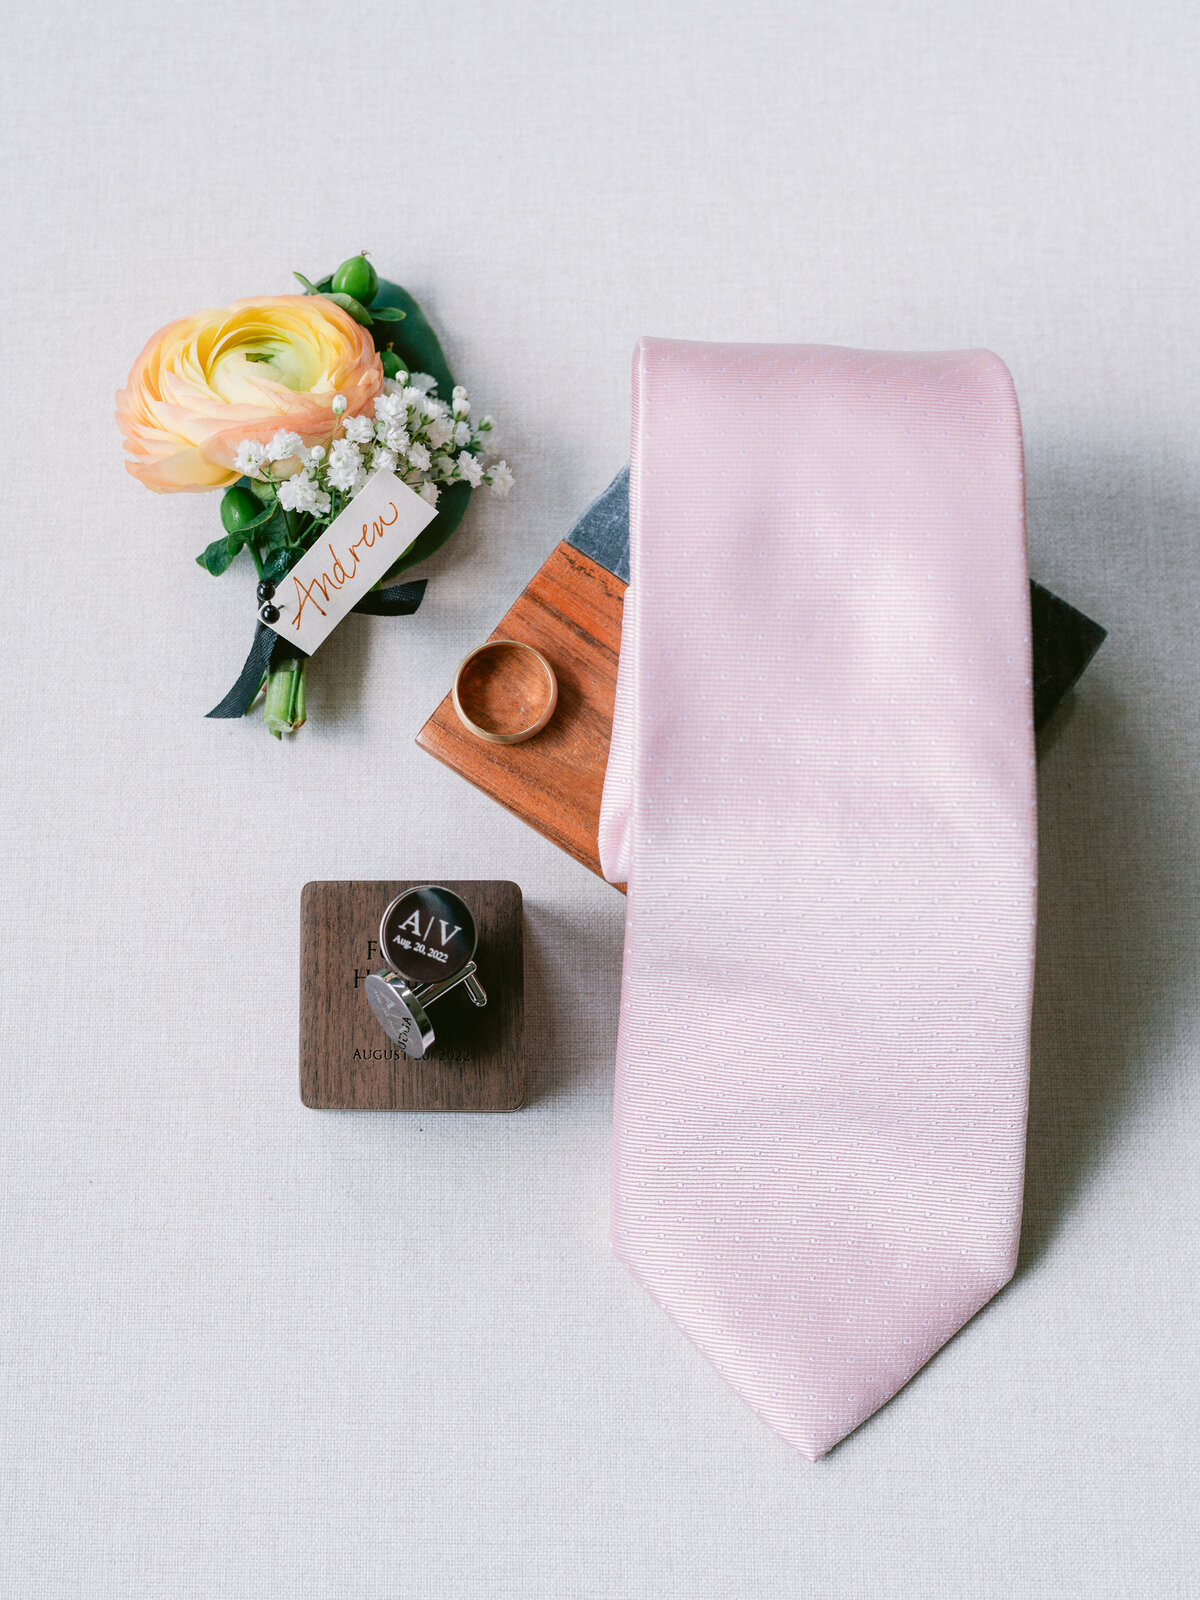 Flatlay of wedding details including tie, rings and florals